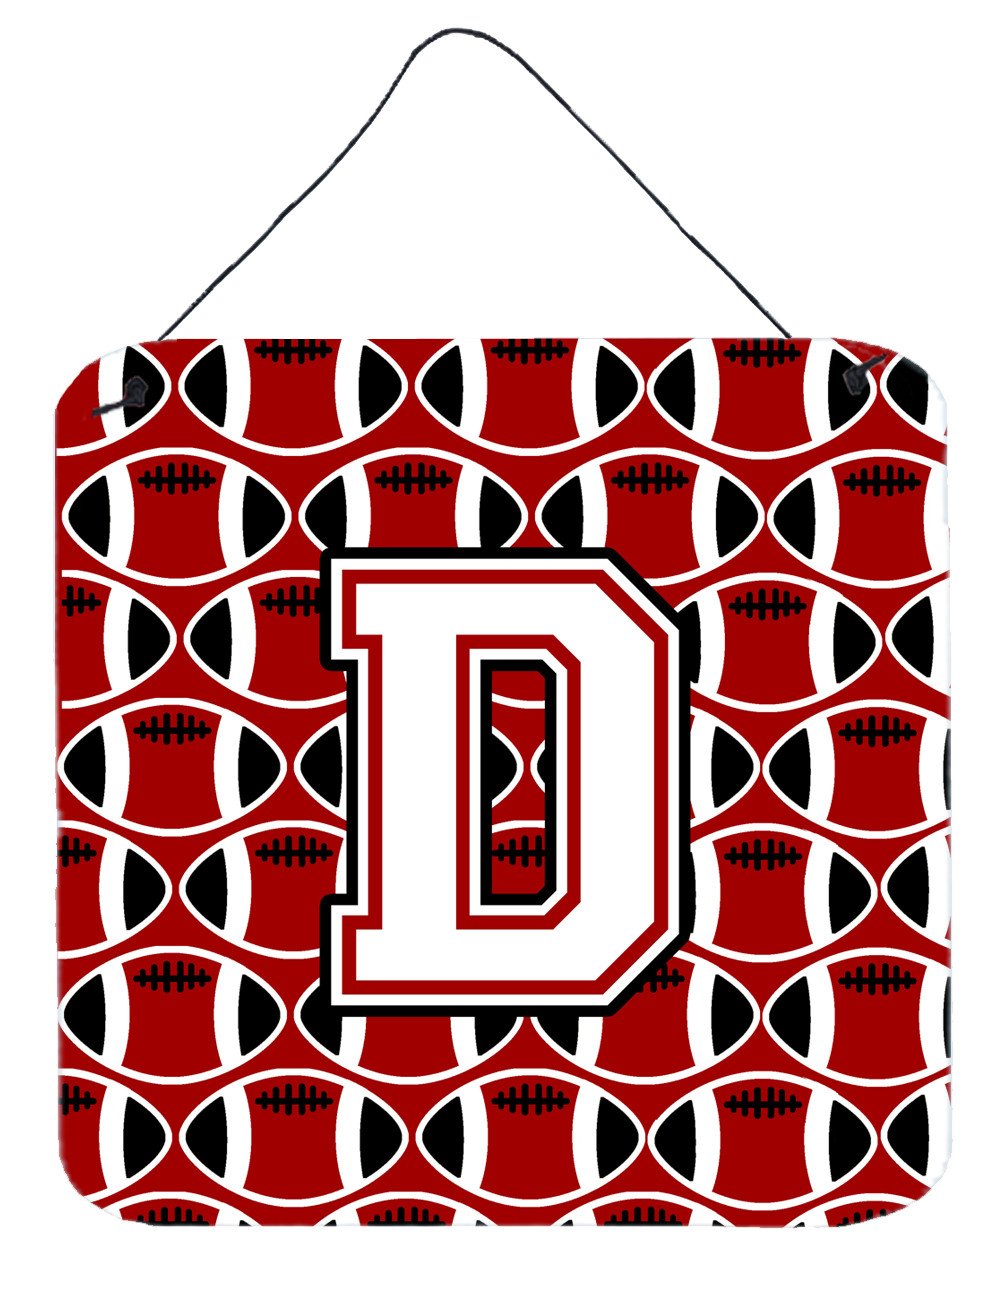 Letter D Football Cardinal and White Wall or Door Hanging Prints CJ1082-DDS66 by Caroline's Treasures